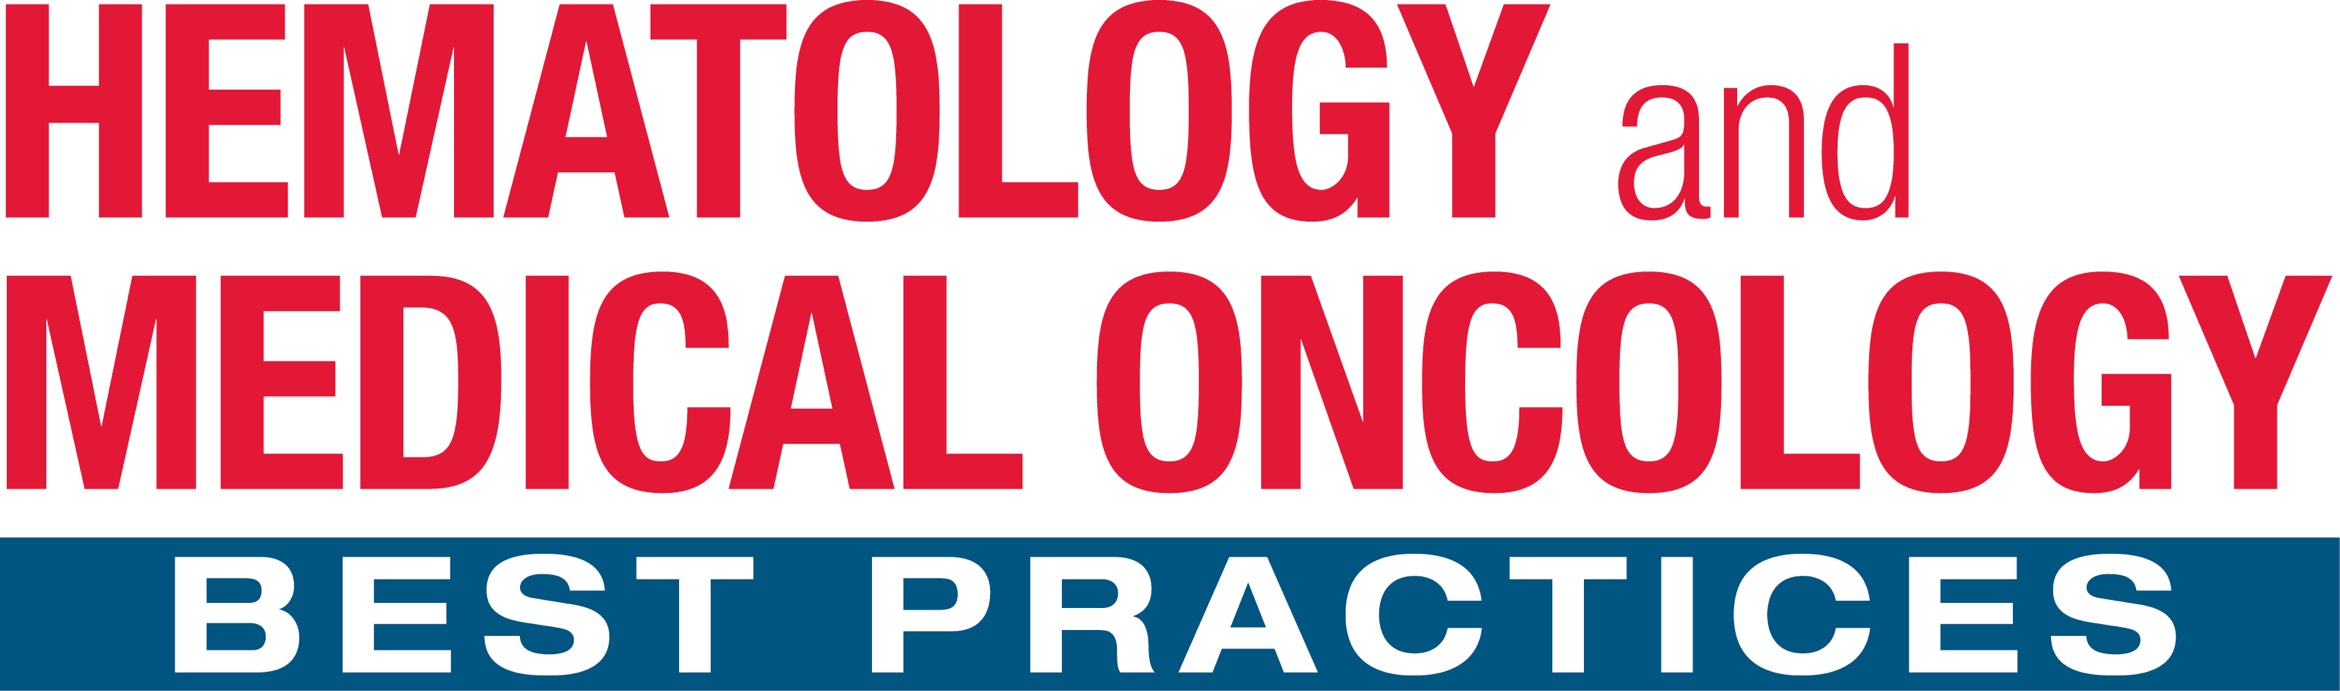 Hematology & Medical Oncology Best Practices Course